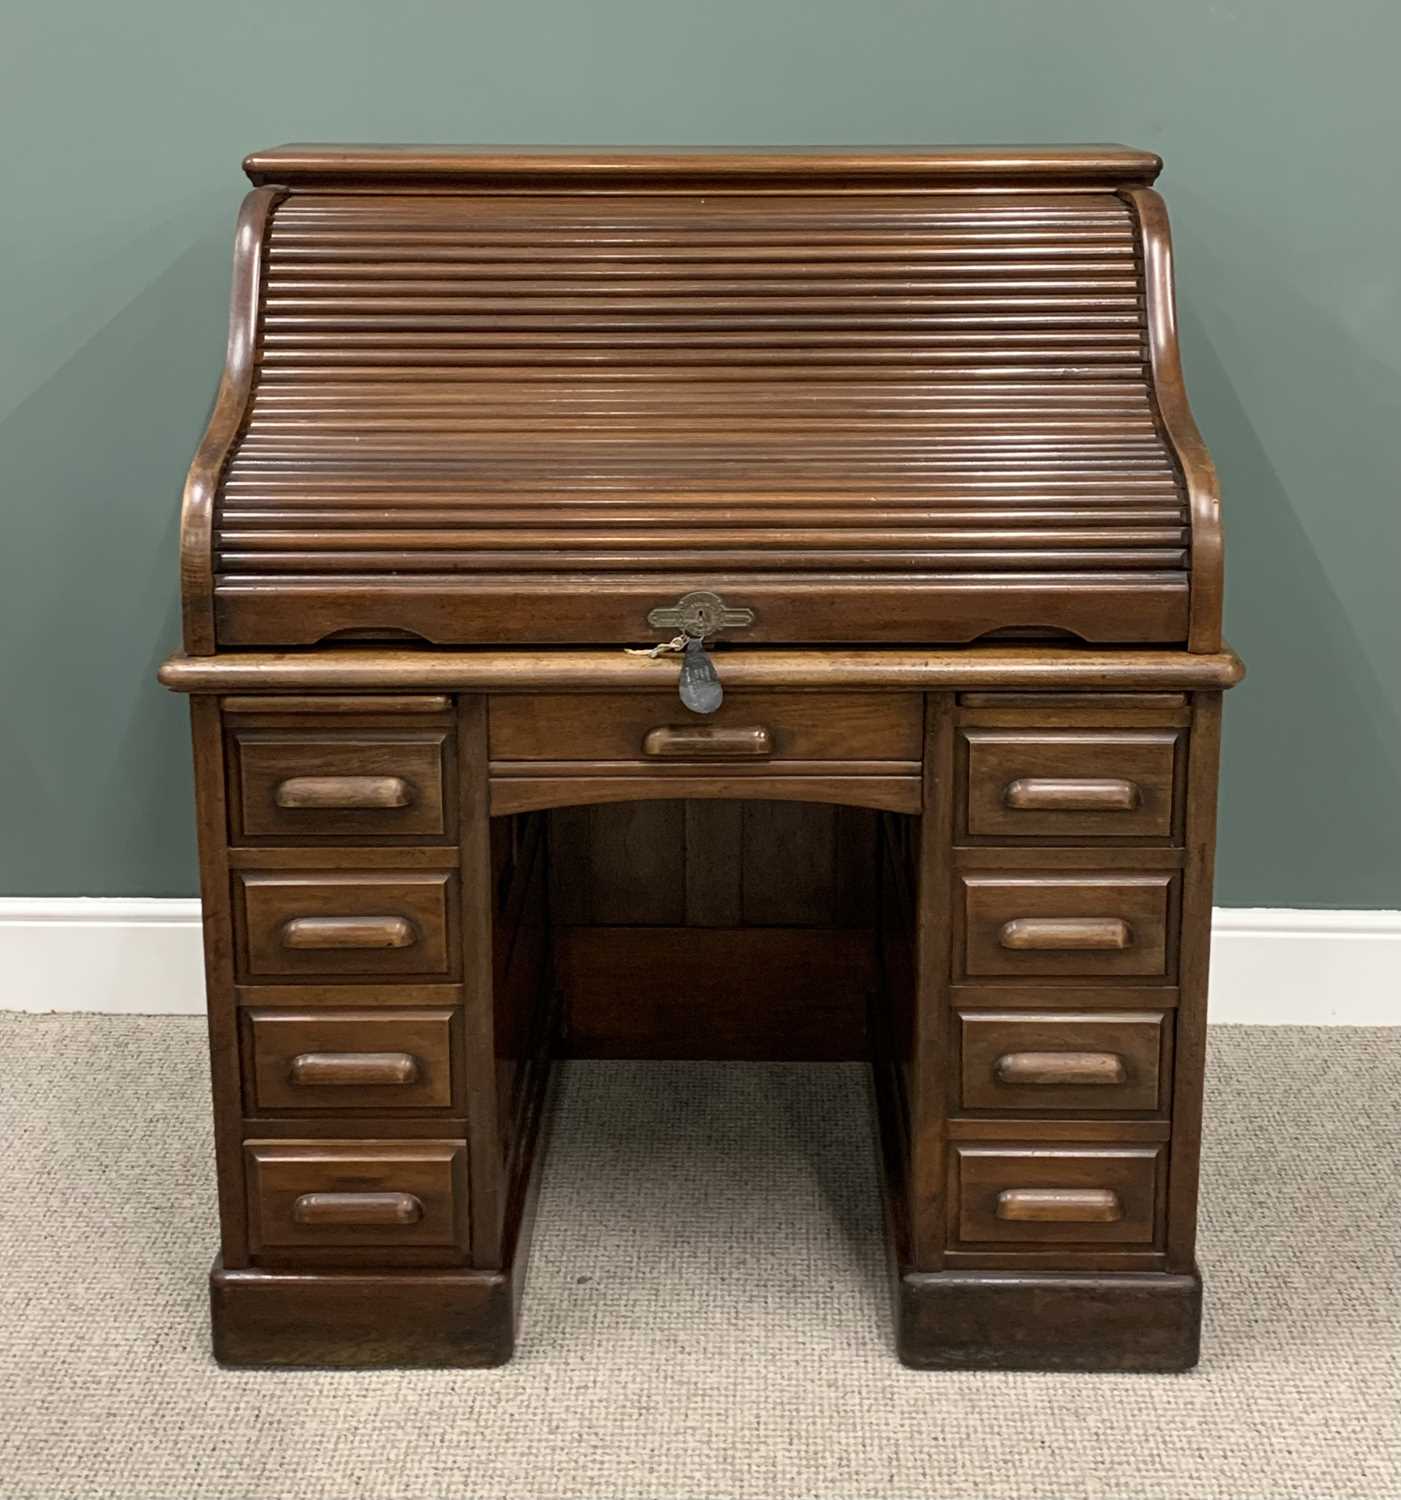 MAHOGANY ROLL TOP DESK BY THOMAS TURNER `A4 Holburn Viaduct, Derby Desk, London, Made in America`